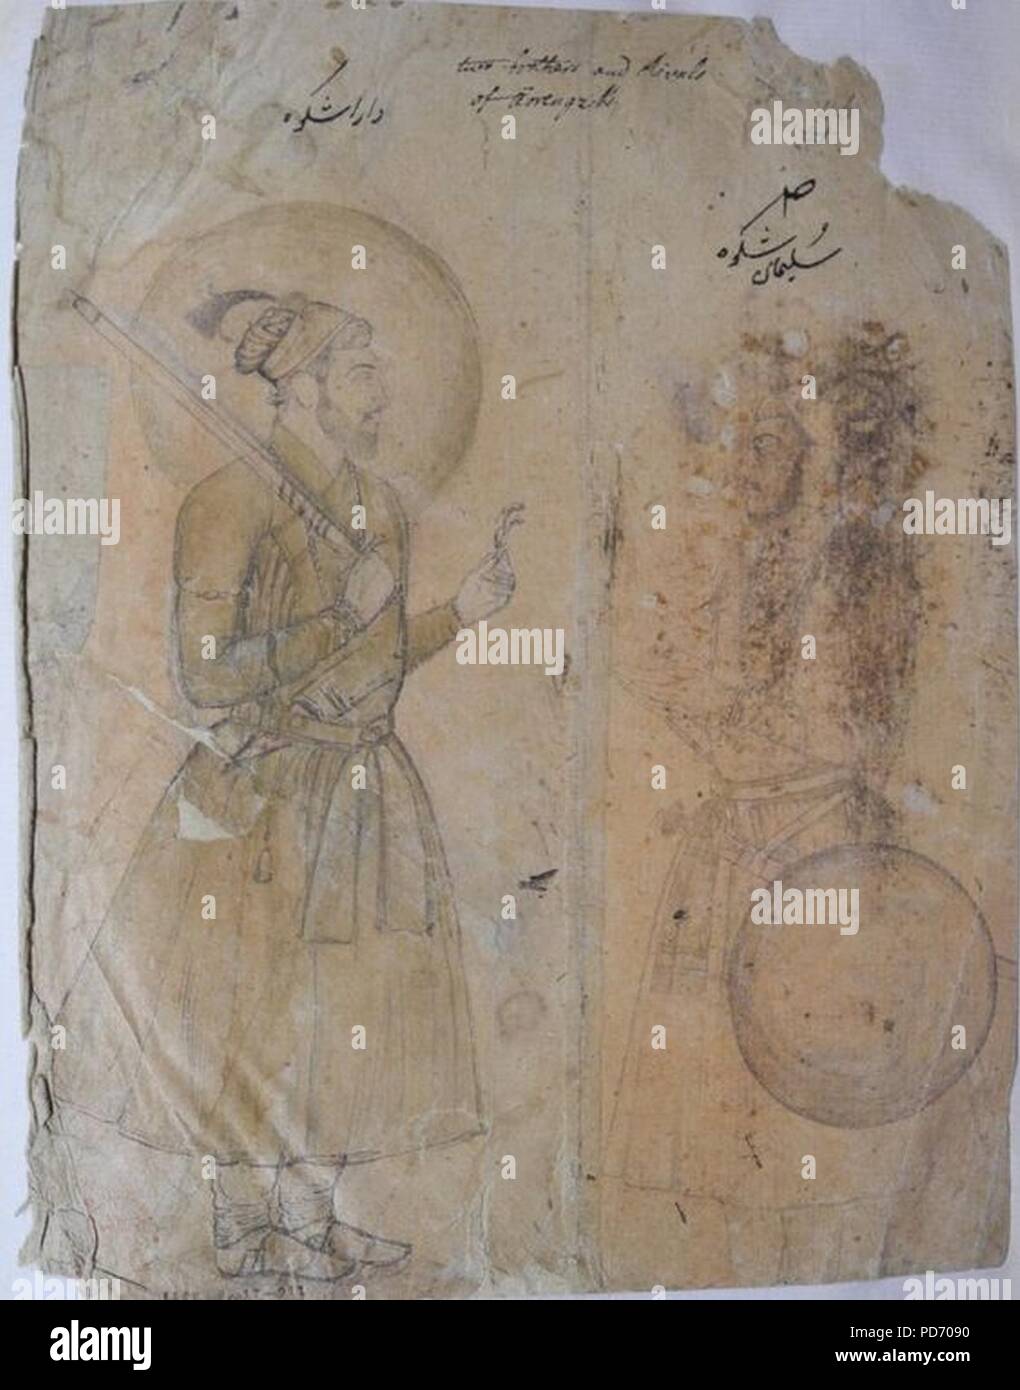 An incomplete draft showing Dara Shikoh (left) with his son Sulaiman Shikoh (right). Stock Photo